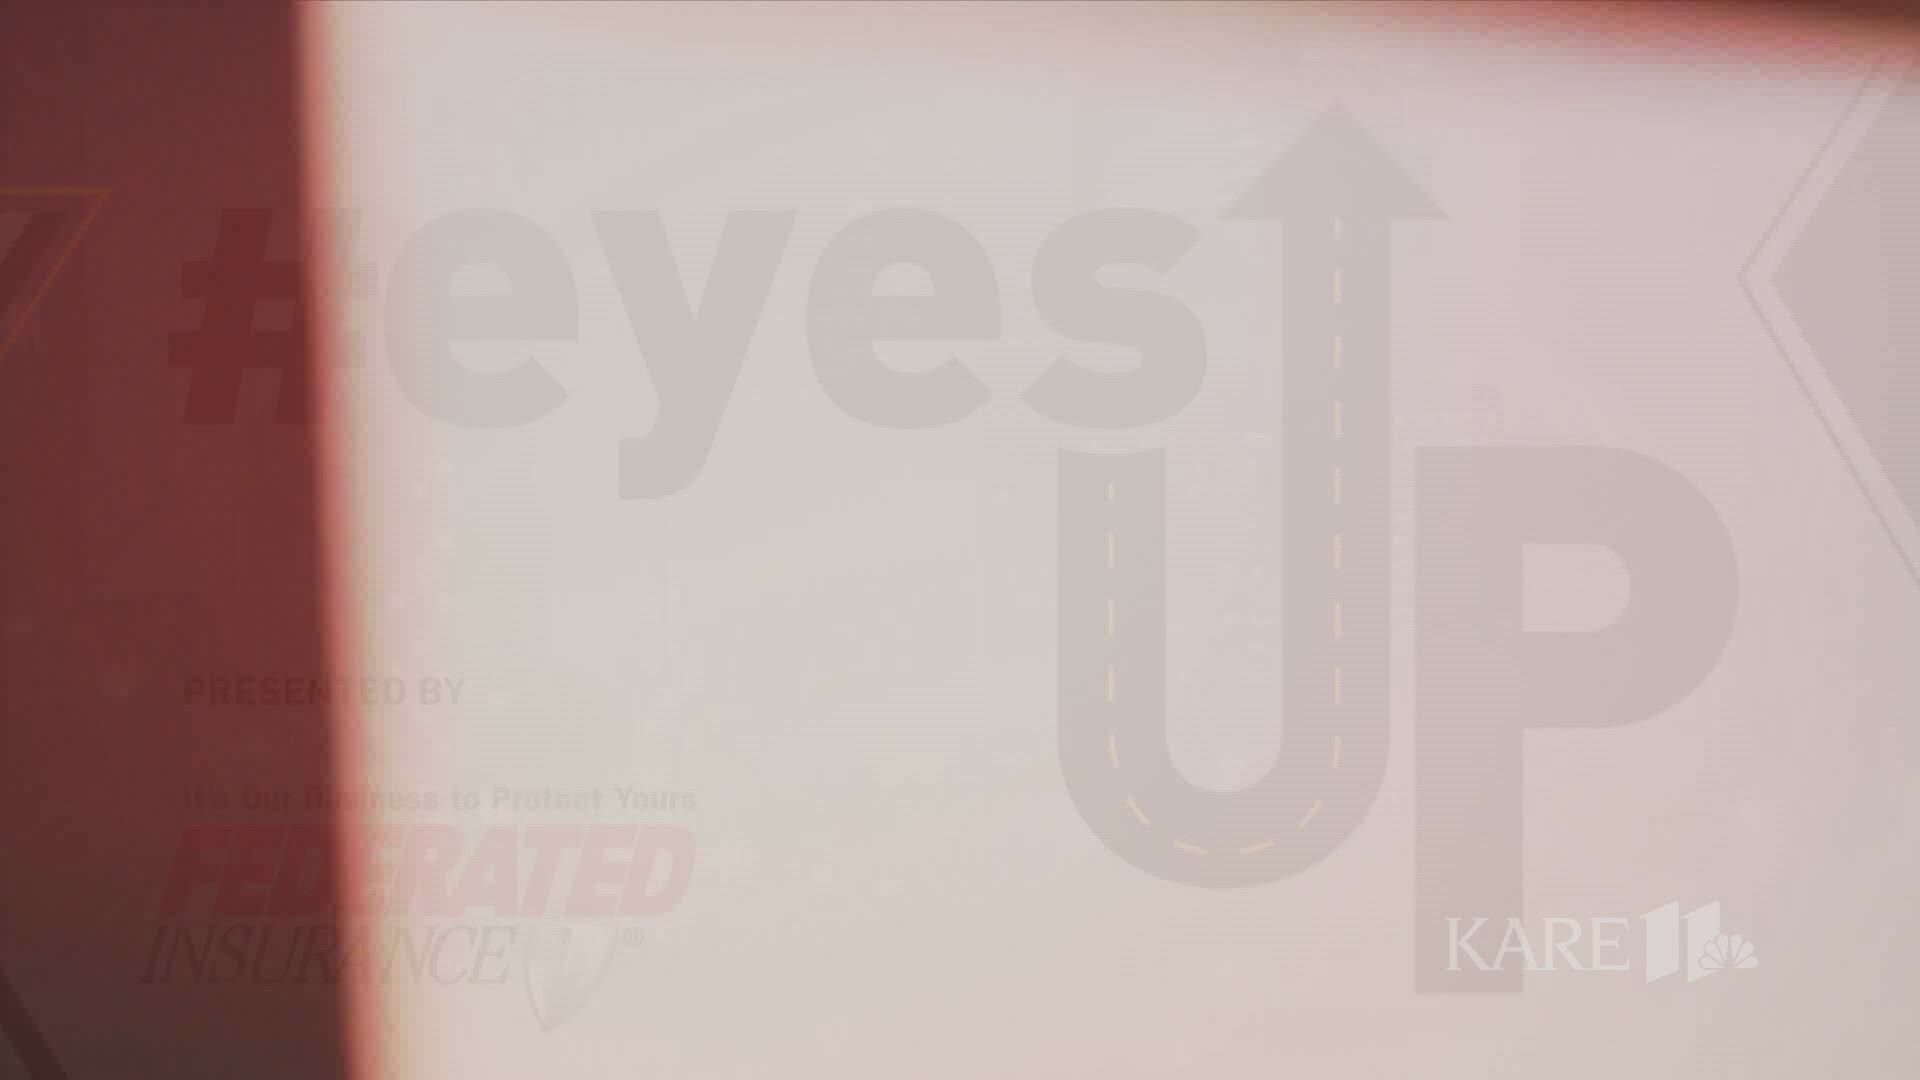 We want to challenge you to help us reduce distracted driving in our communities by joining the KARE 11 #eyesUP Distracted Driving Campaign. https://kare11.tv/2TOz1ML